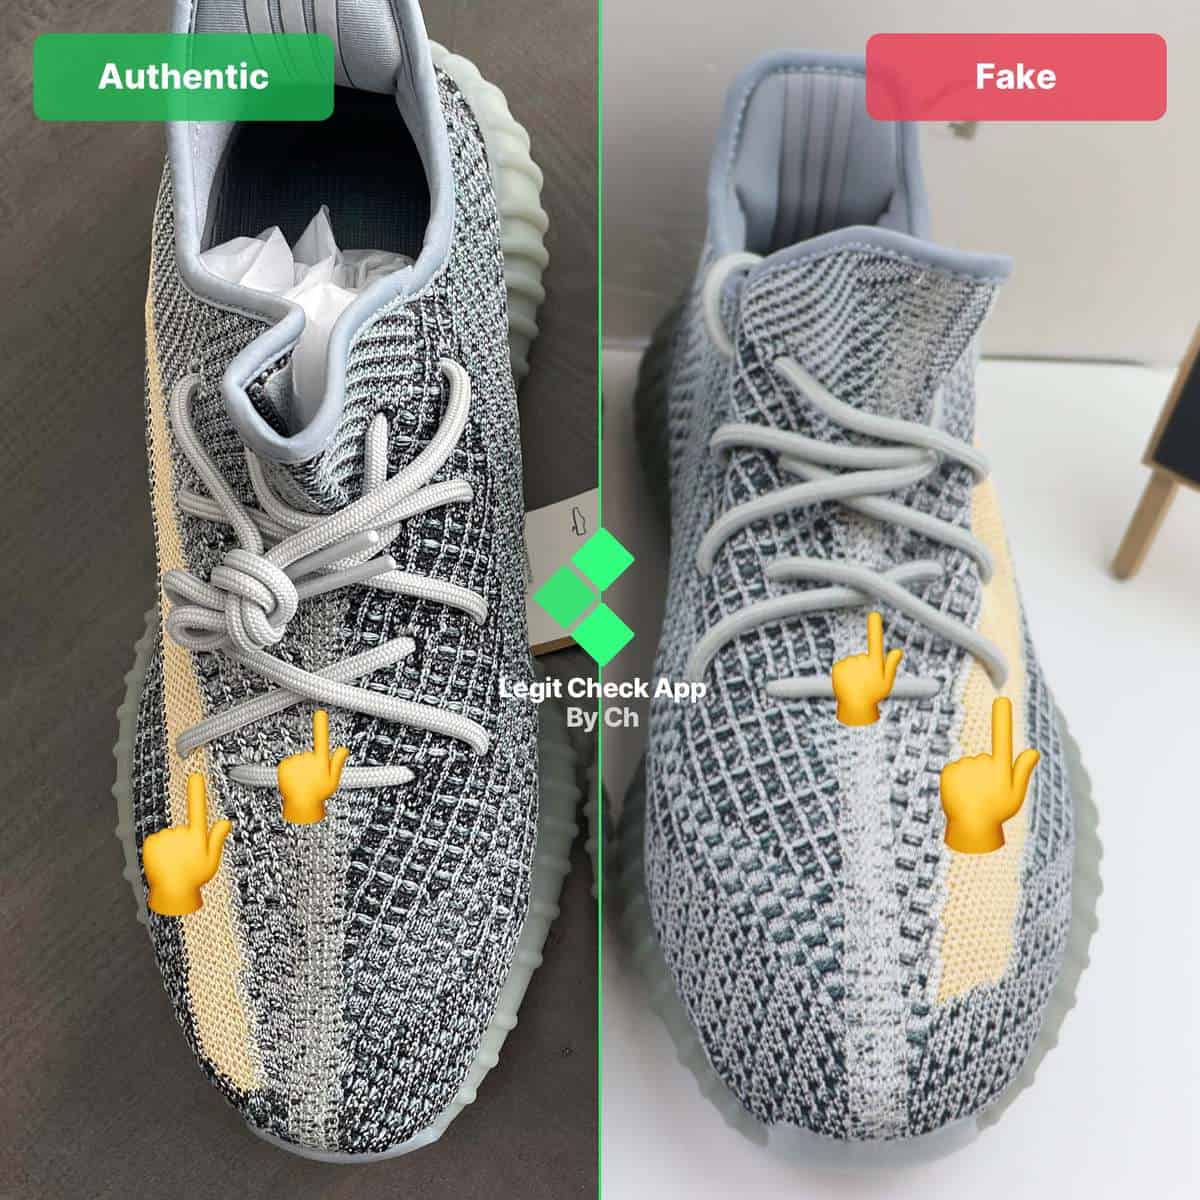 yeezy shoes are made in